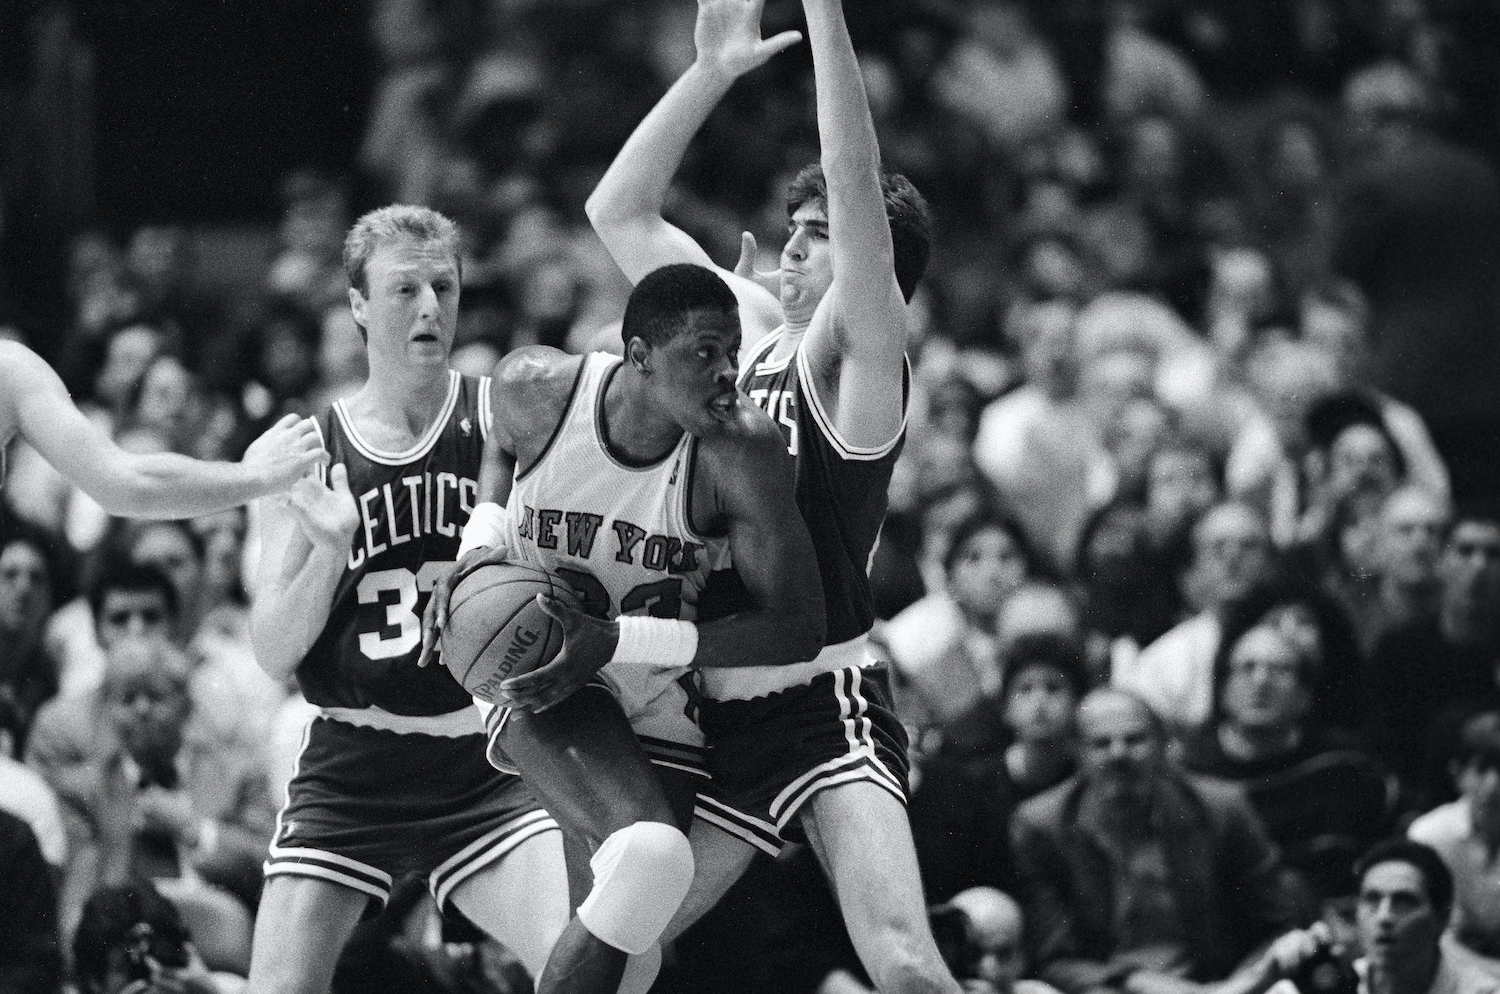 Larry Bird (L) and Patrick Ewing (C) had plenty of head-to-head battles before becoming friends.